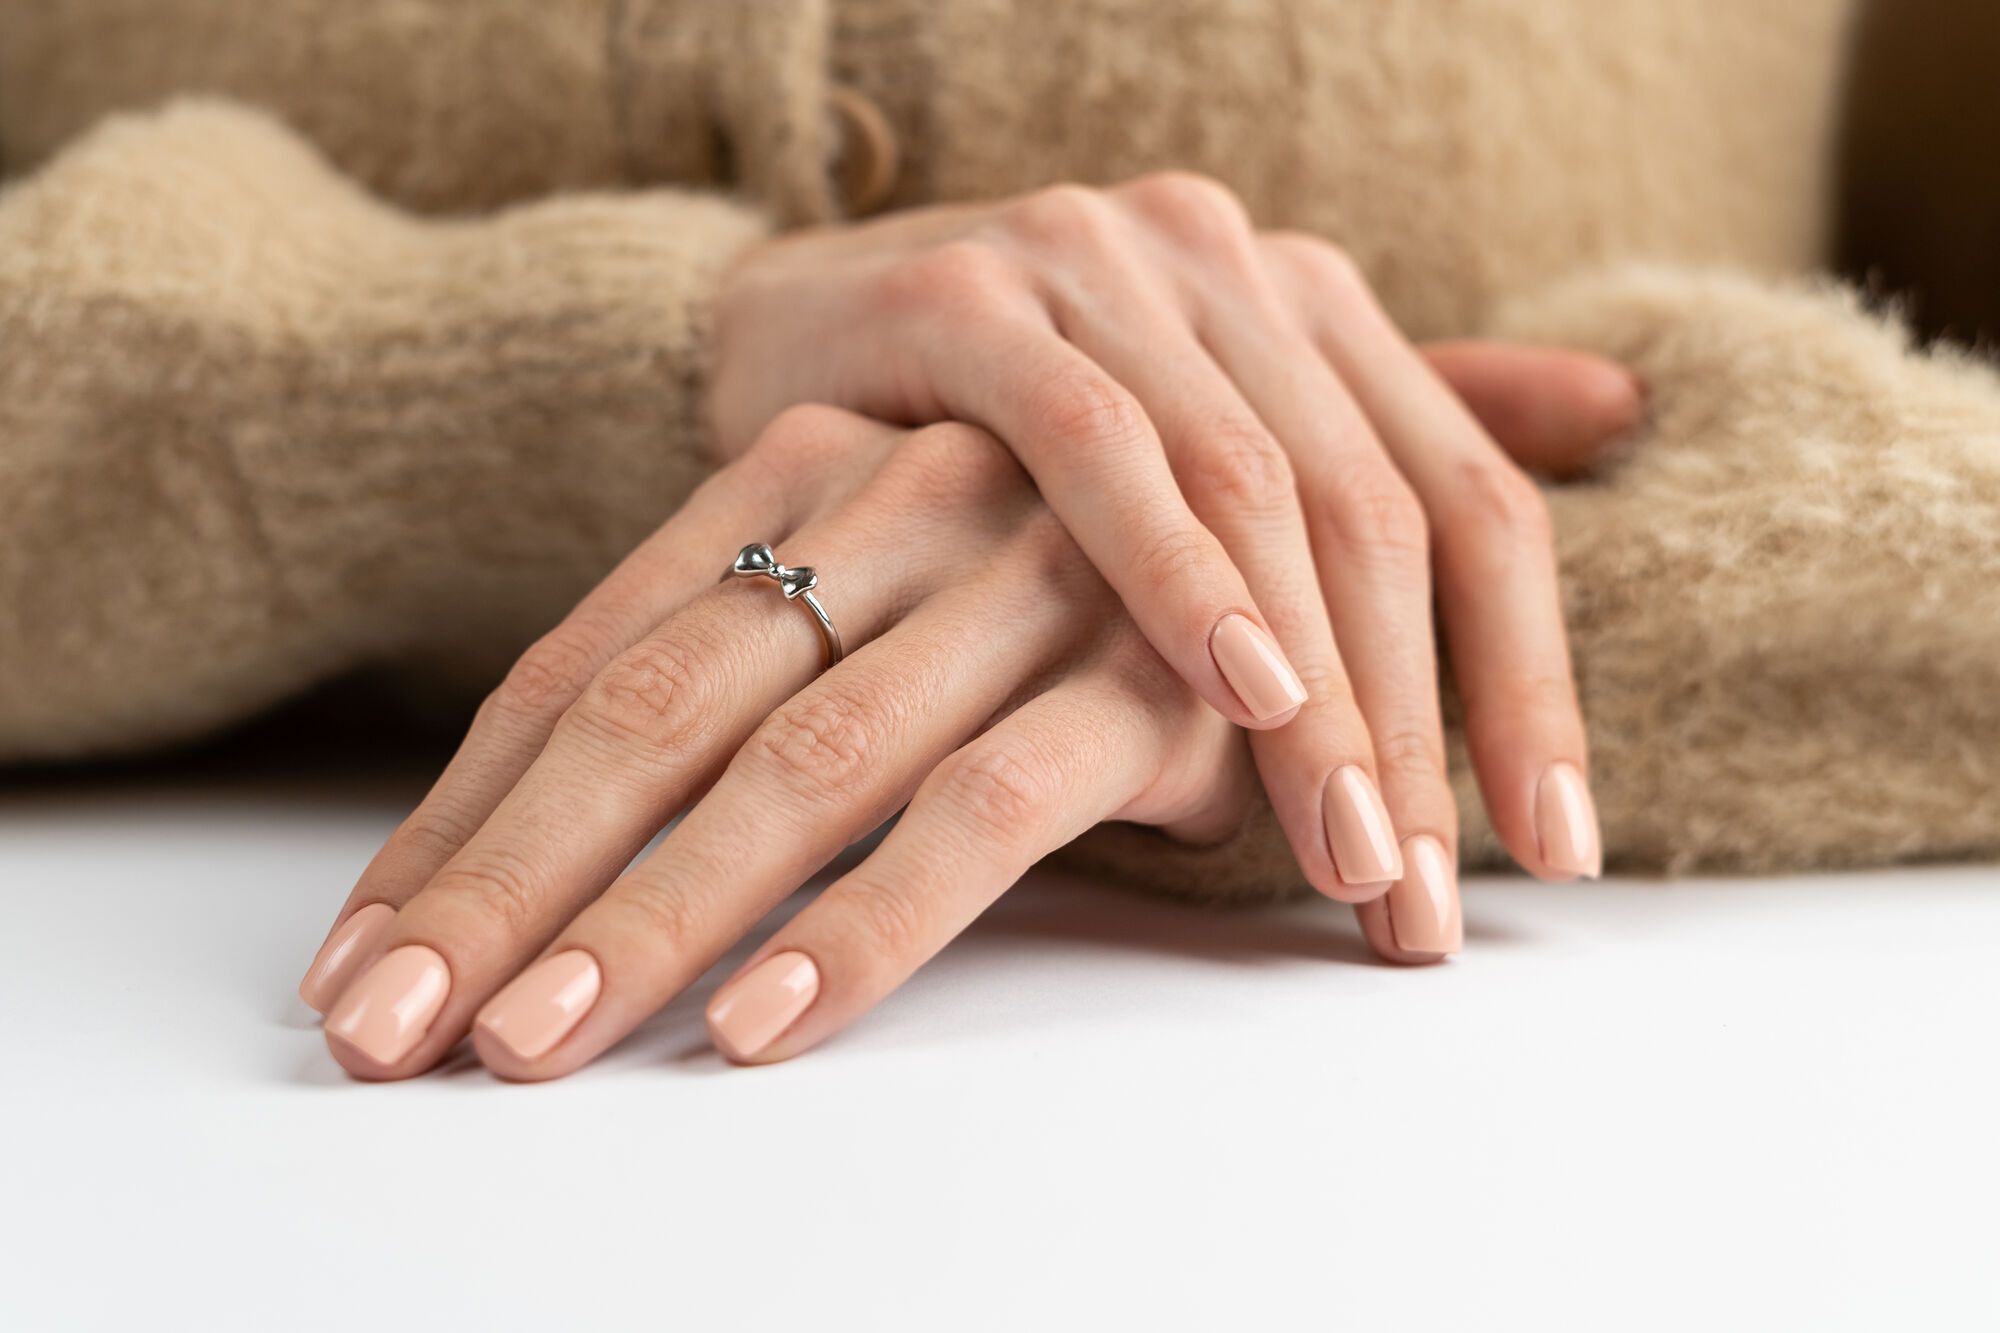 Manicure of a ''rich girl'': secrets of real fashionistas that make hands well-groomed and rejuvenated. Photo